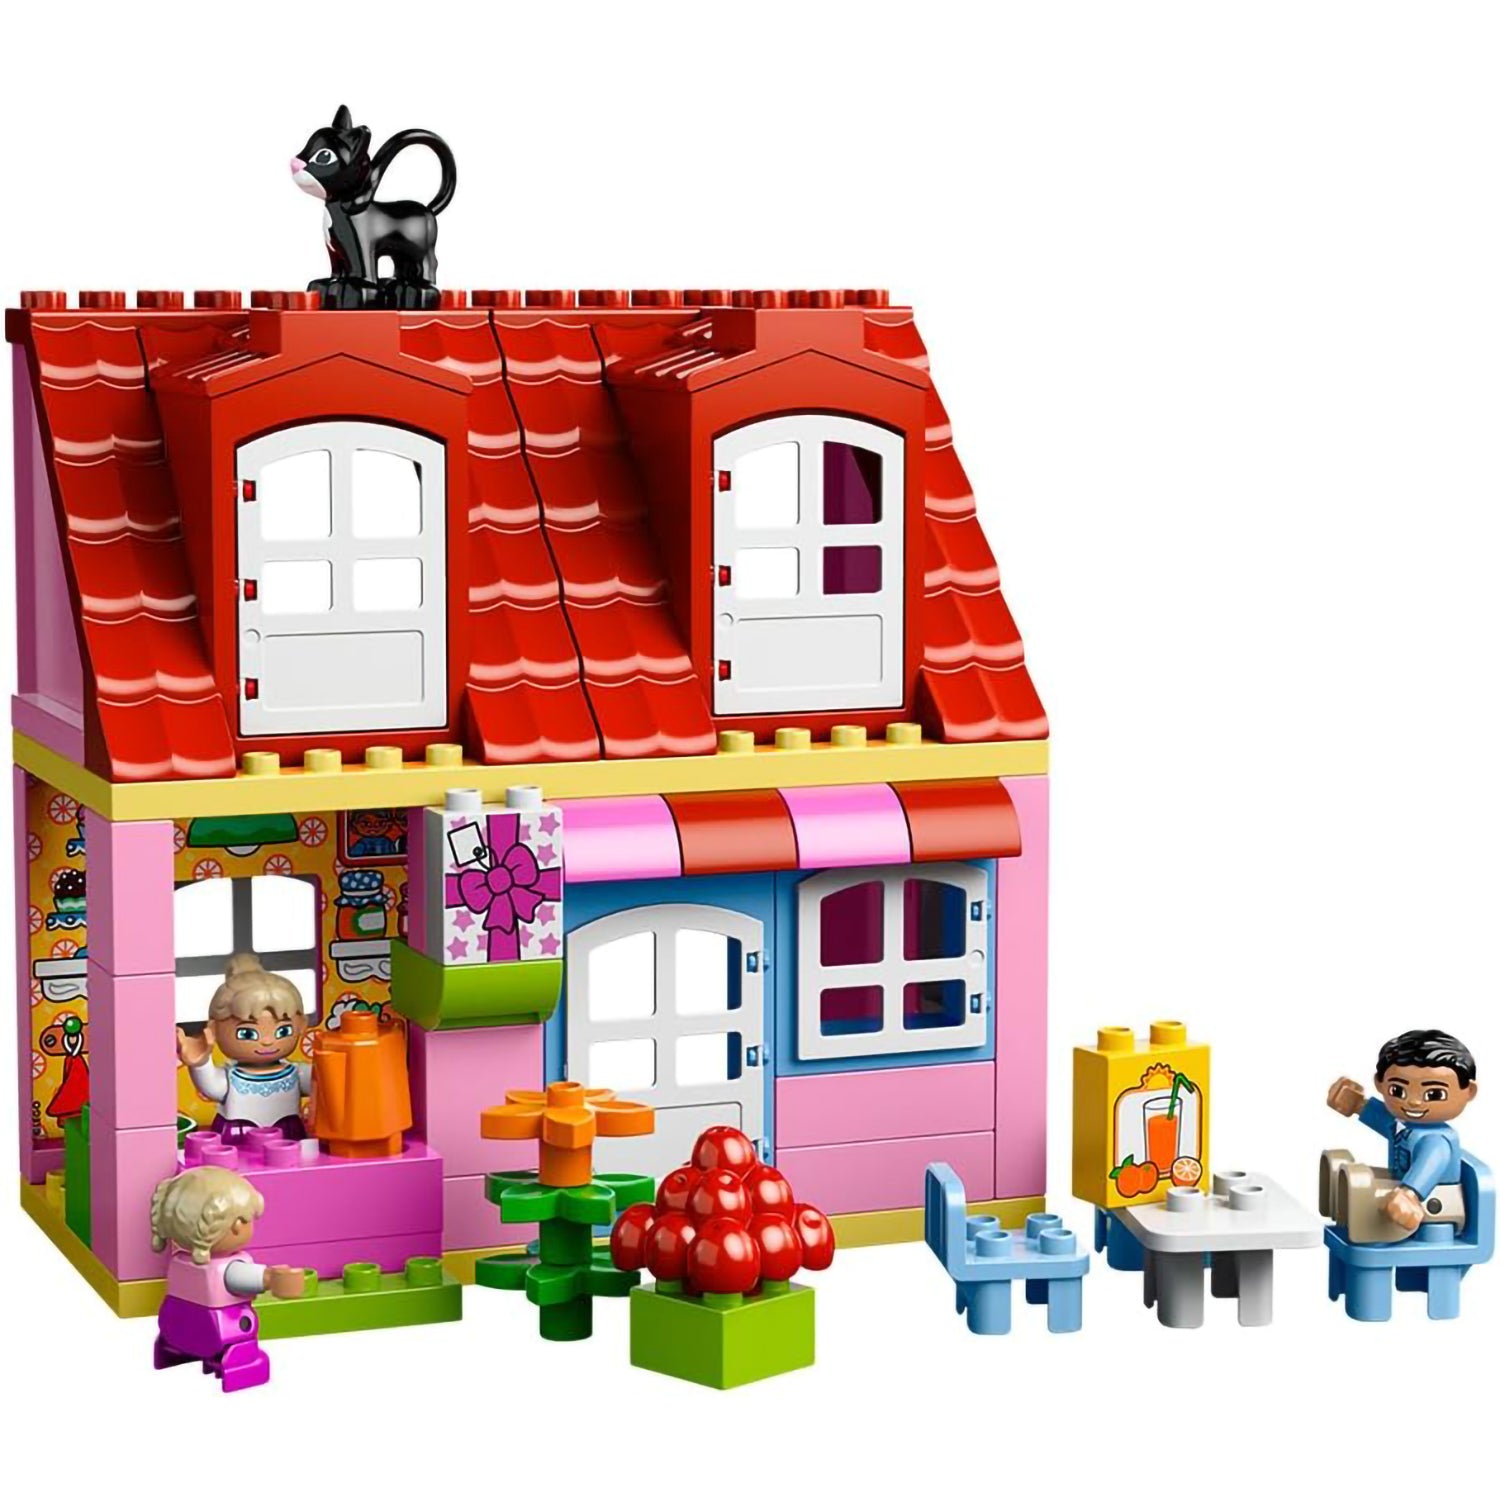 LEGO Duplo - Play House [10505 - 83 Pieces]